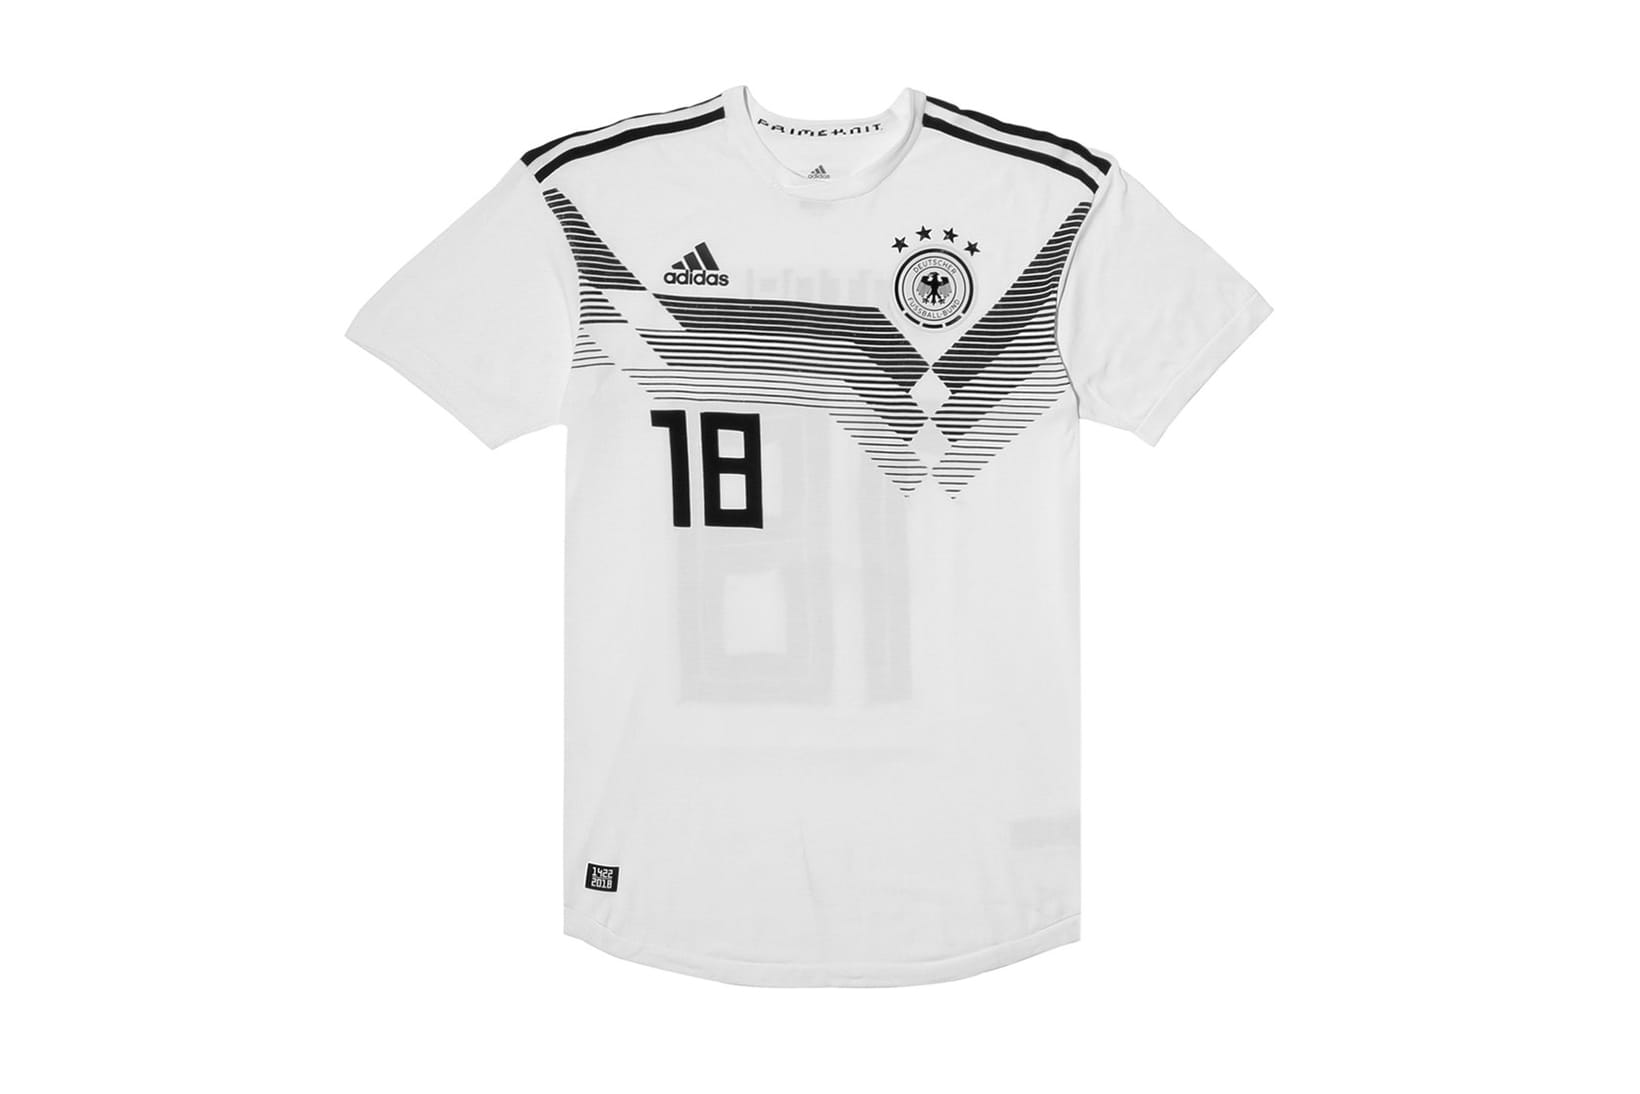 Germany's iconic jerseys through the years